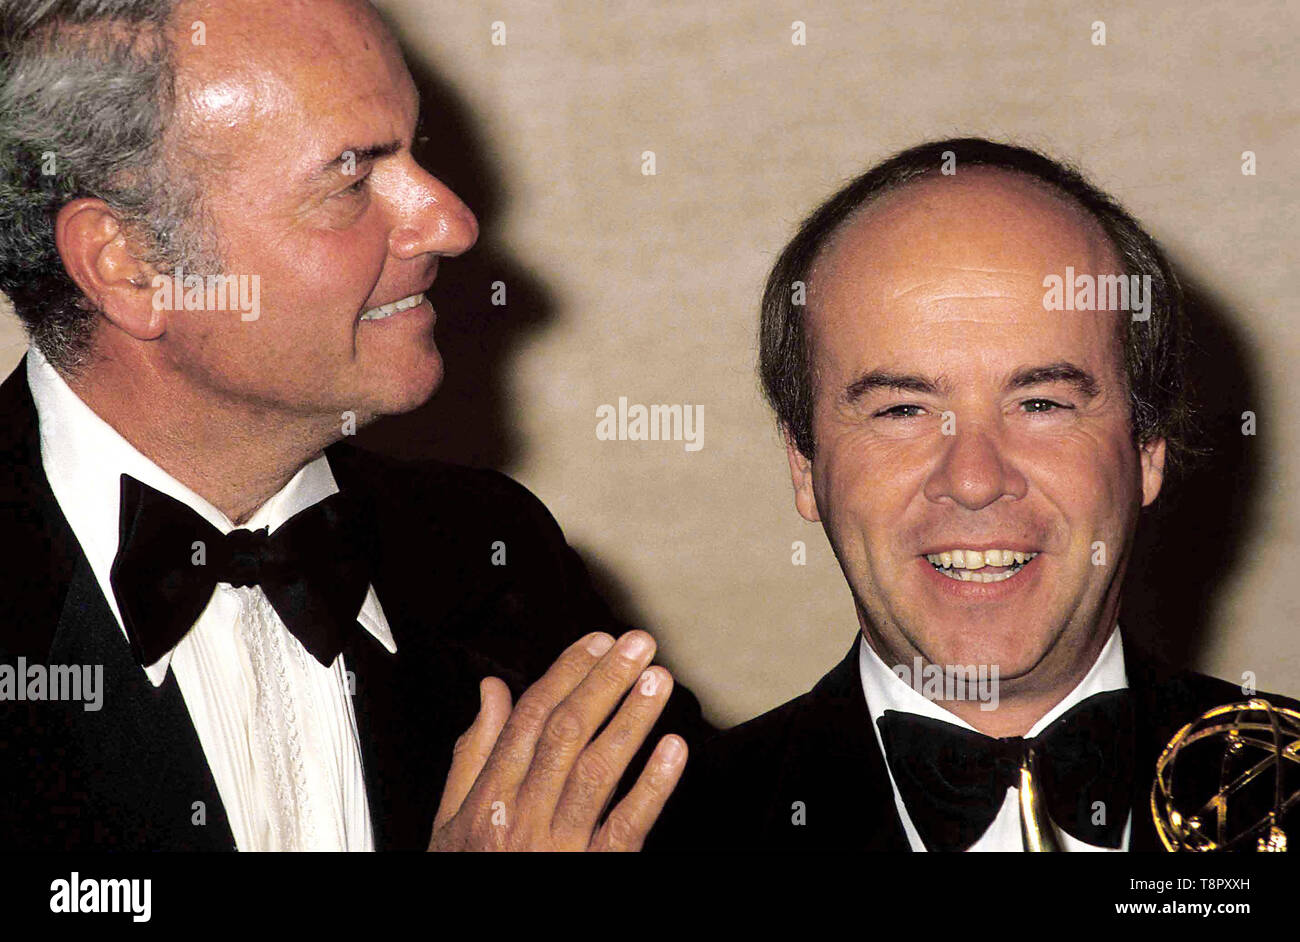 May 14, 2019: Los Angeles, California USA: FILE: Actor and comedian TIM CONWAY, best known for his Emmy winning work on 'The Carol Burnett Show, ' died on Tuesday morning. He was 85. PICTURED: TIM CONWAY and HARVEY KORMAN in the Press Room during the 1978 Emmy Awards. Credit: Bob NobleGlobe Photos/ZUMAPRESS.com/Alamy Live News Stock Photo